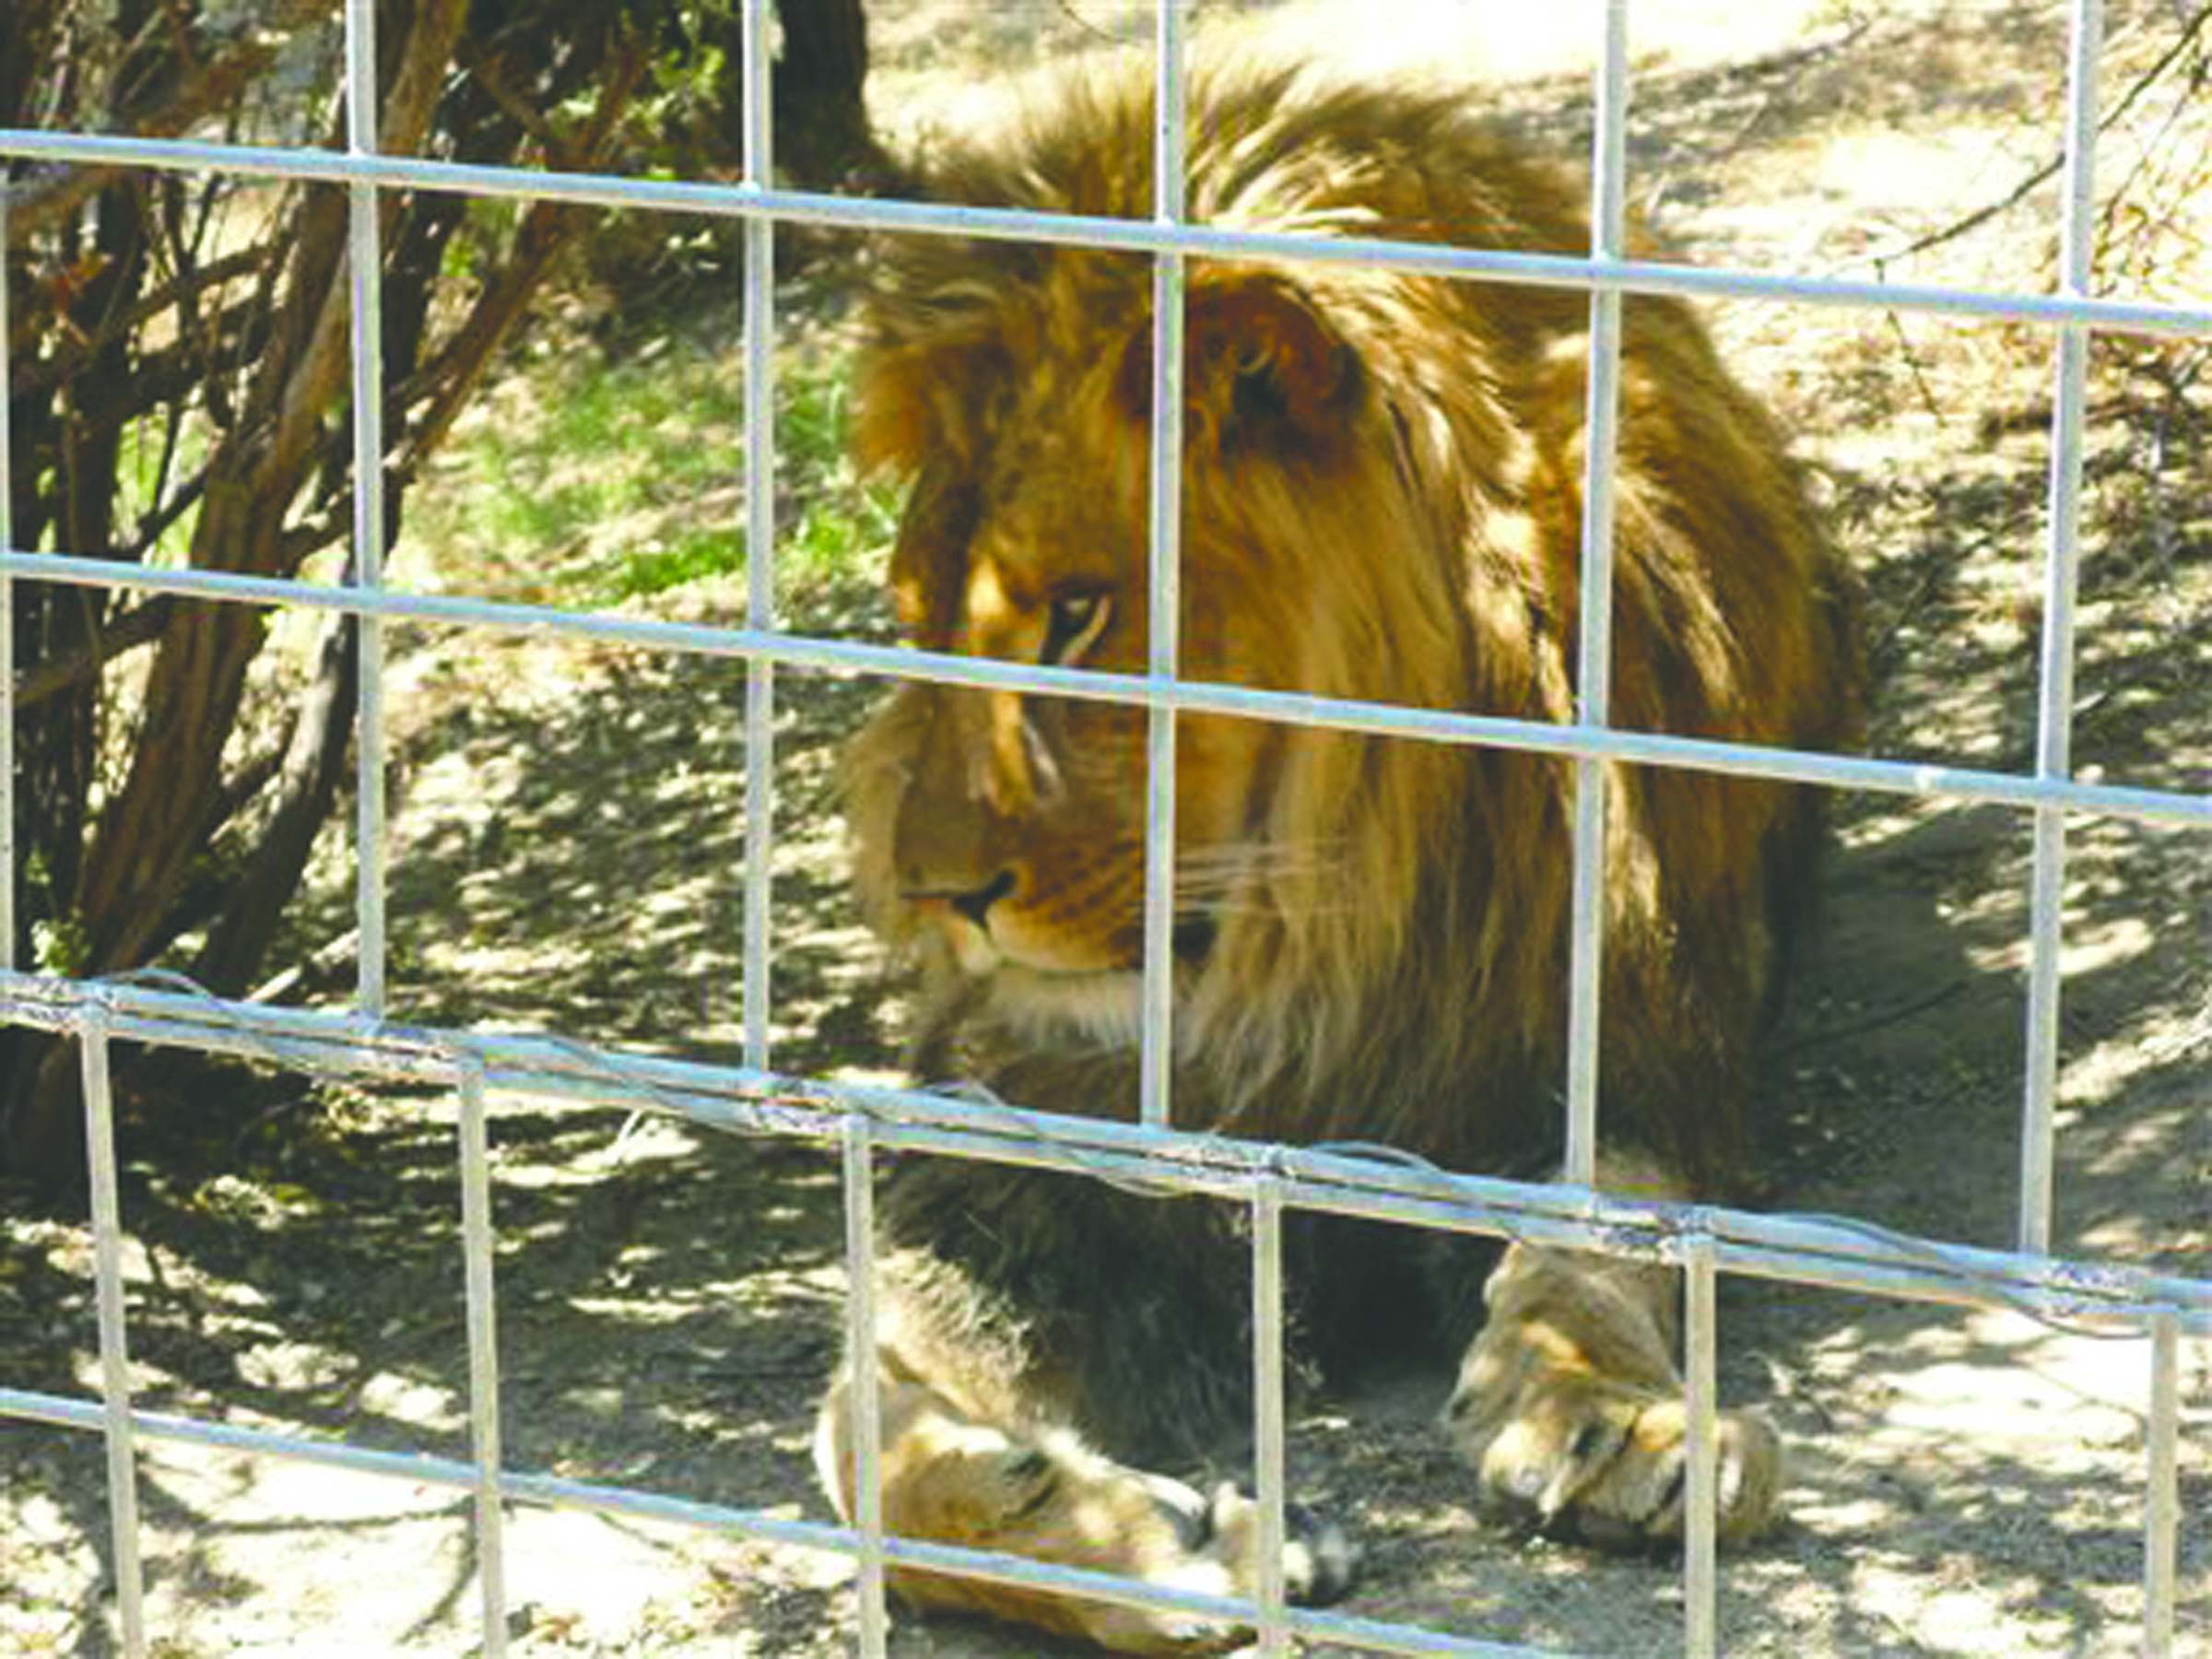 This 2012 photo shows a 4-year-old male African lion named Couscous at Cat Haven